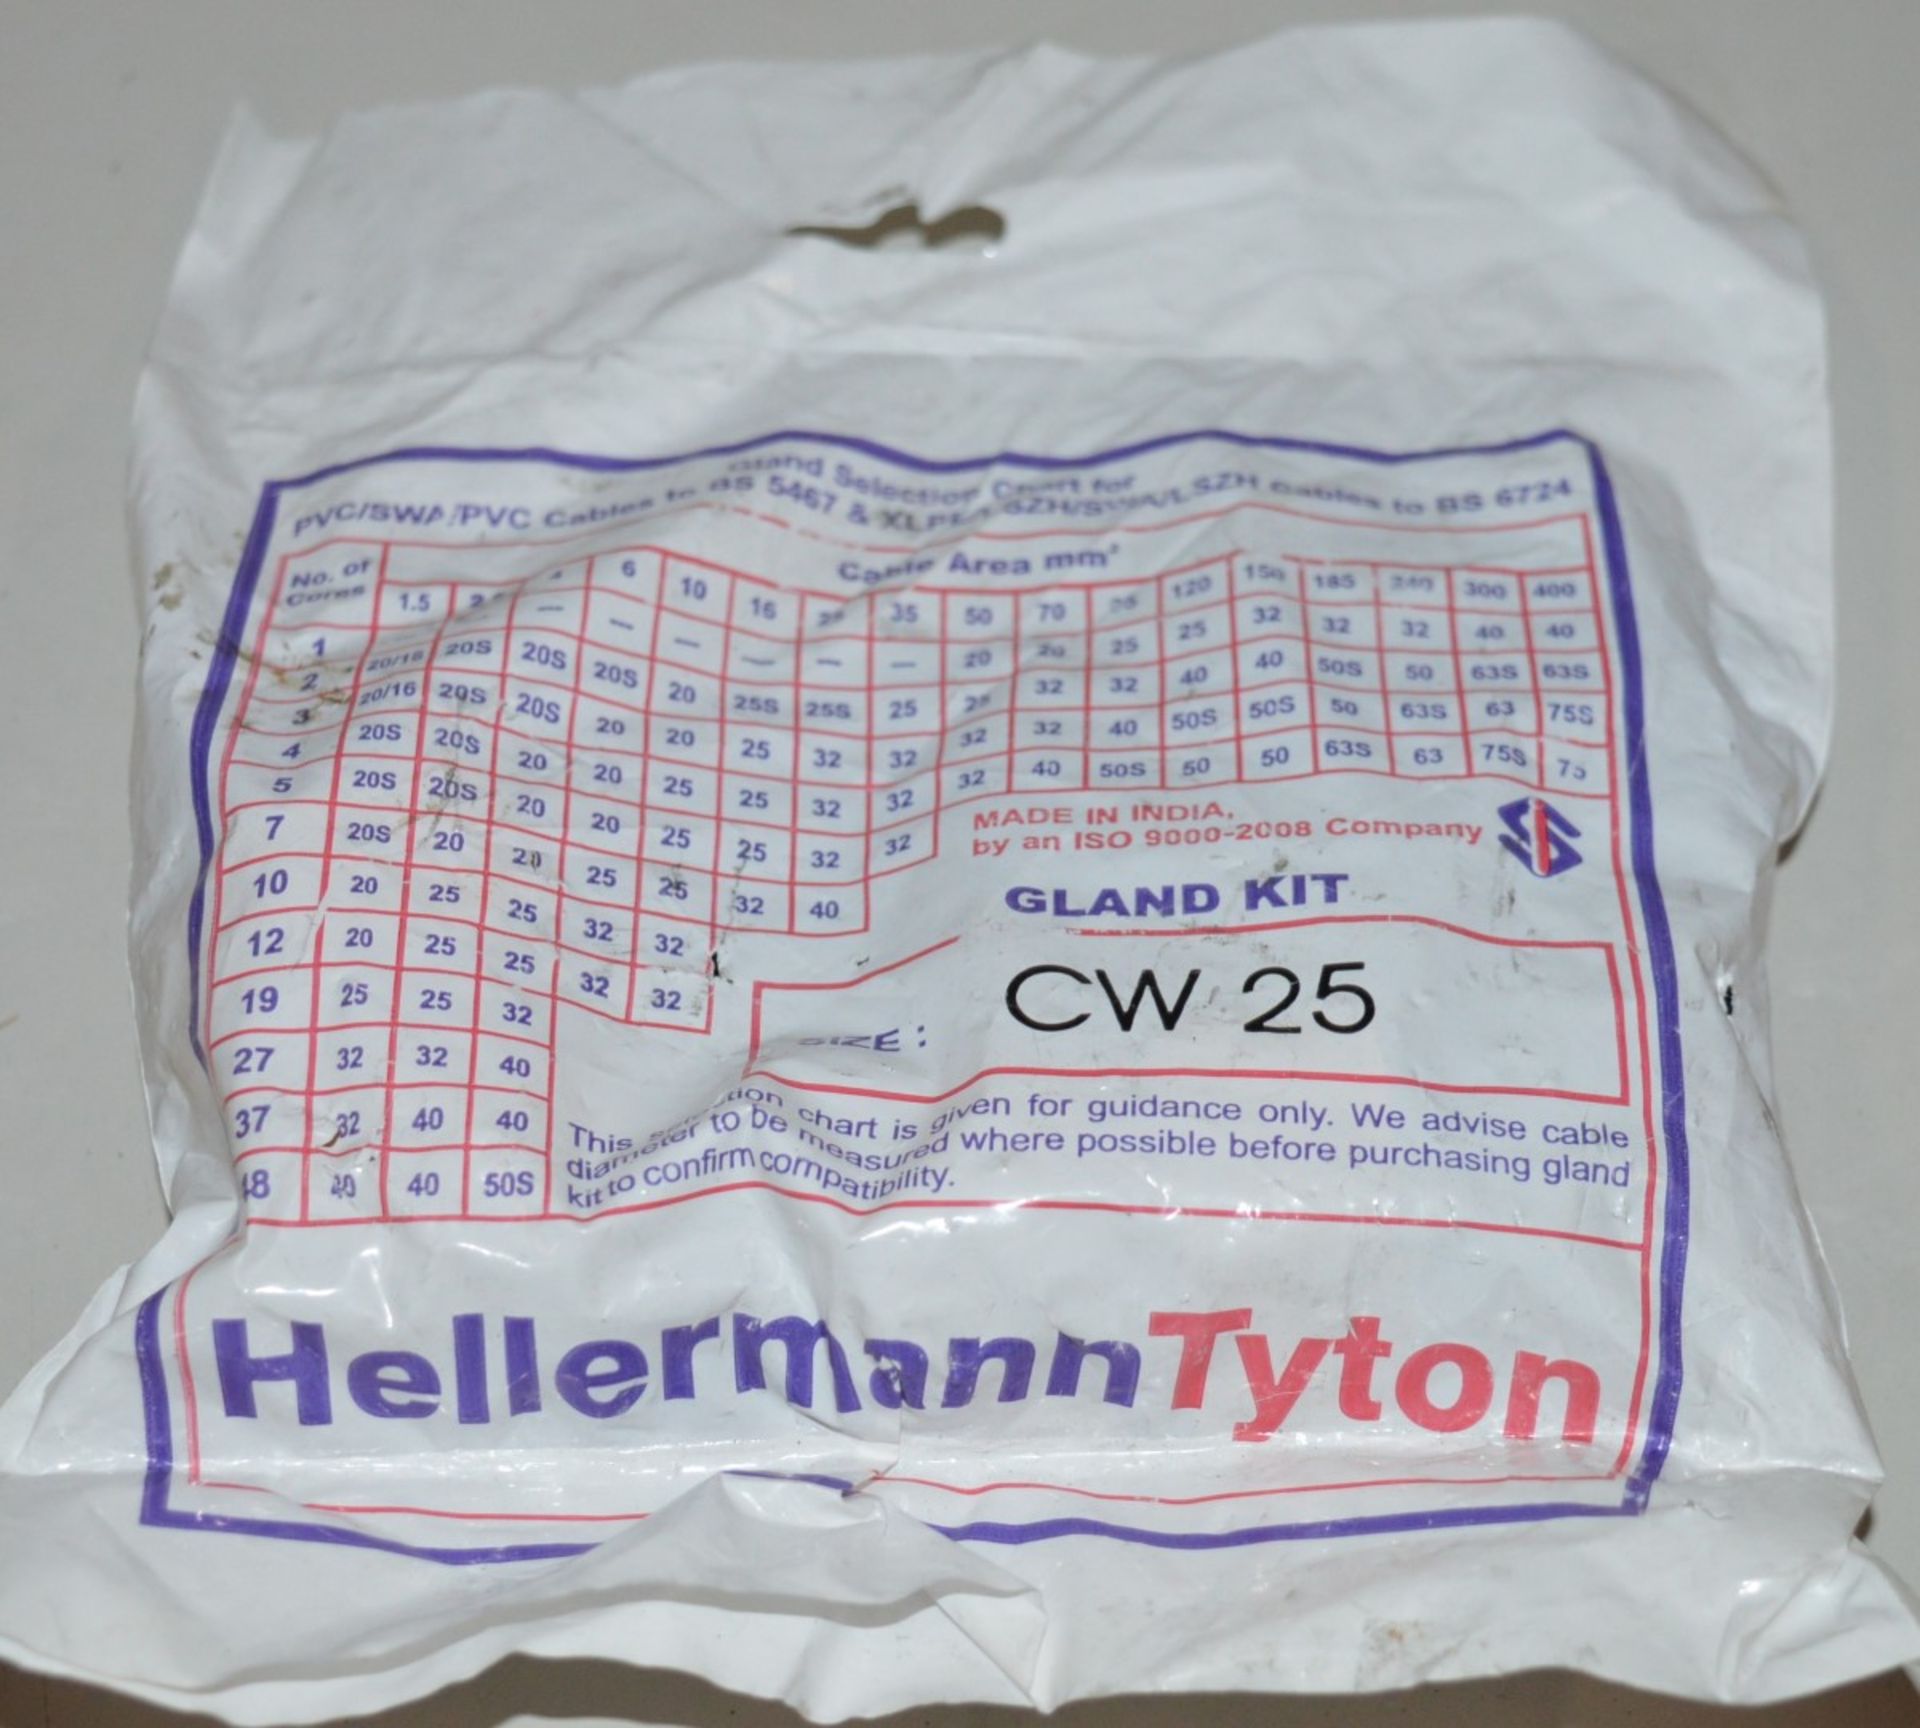 22 x Hellermann Tyton CW25 25mm Industrial Brass Cable Gland Kits - Brand New Stock - CL300 - Ref - Image 3 of 3